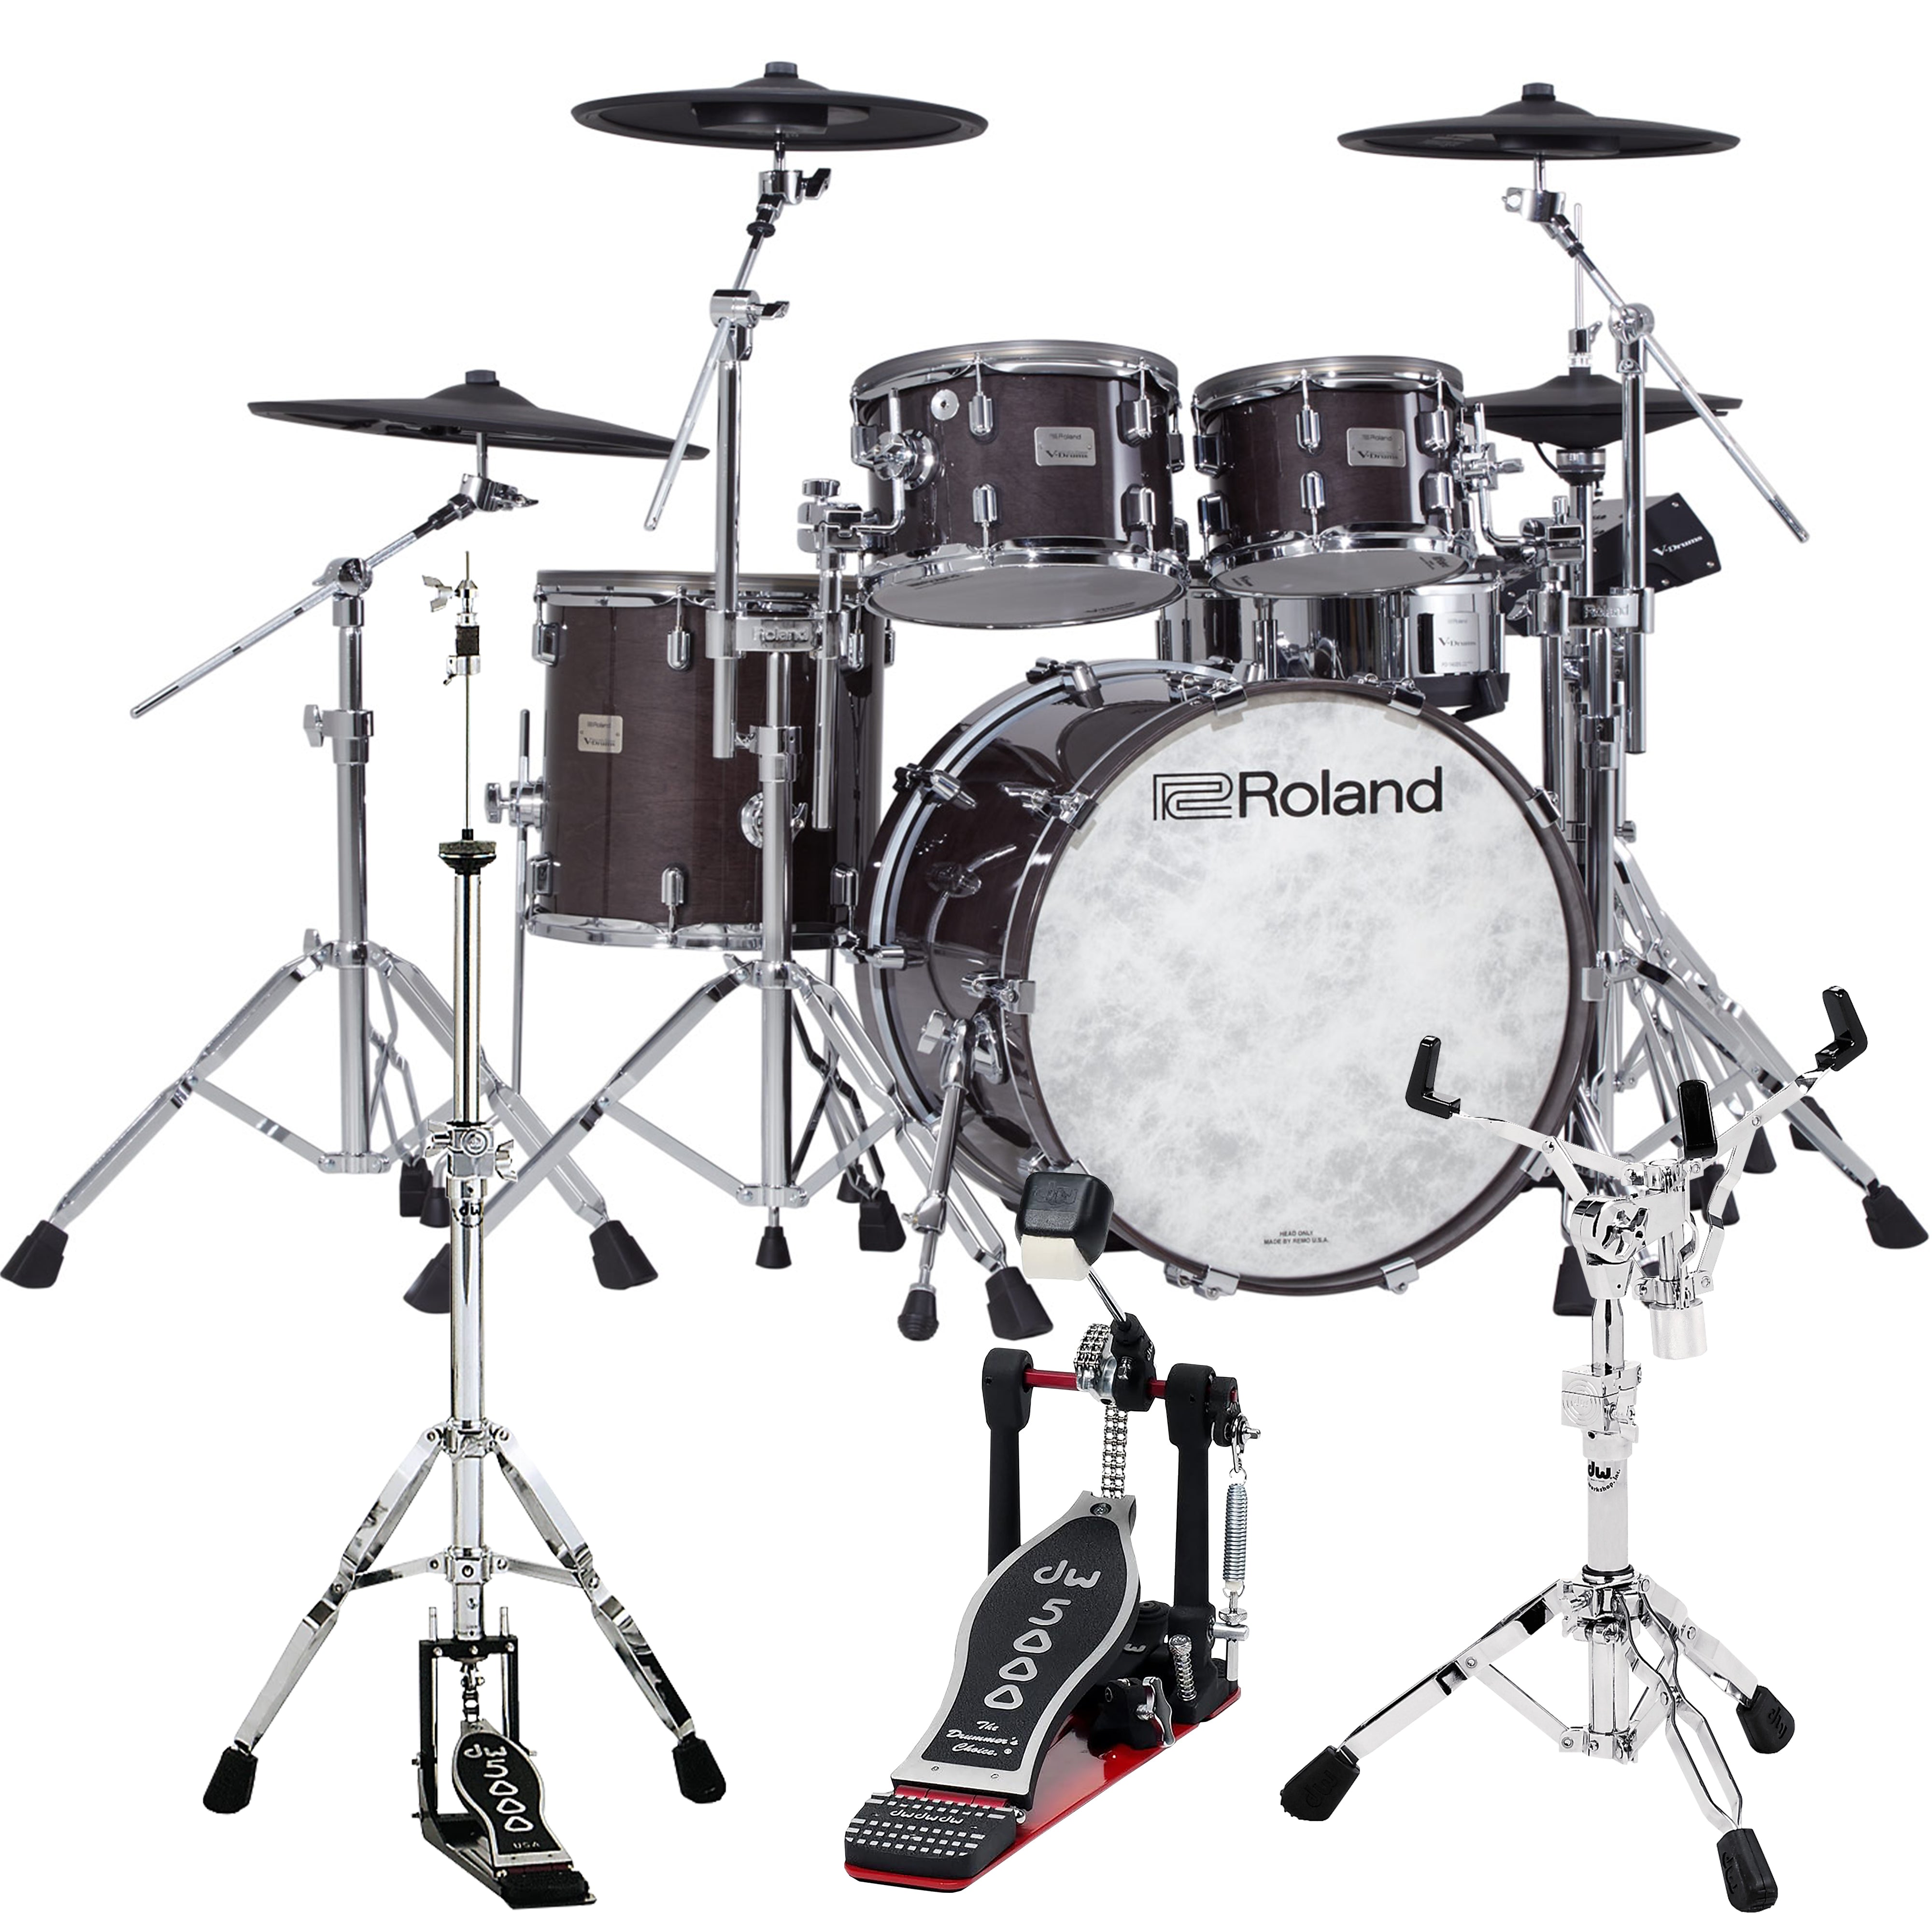 Perspective view of Roland VAD706 V-Drums Acoustic Design 5pc Electronic Drum Set - Gloss Ebony showing front and left side. DW 5000 series pedal, and snare and hi-hat stands are featured.